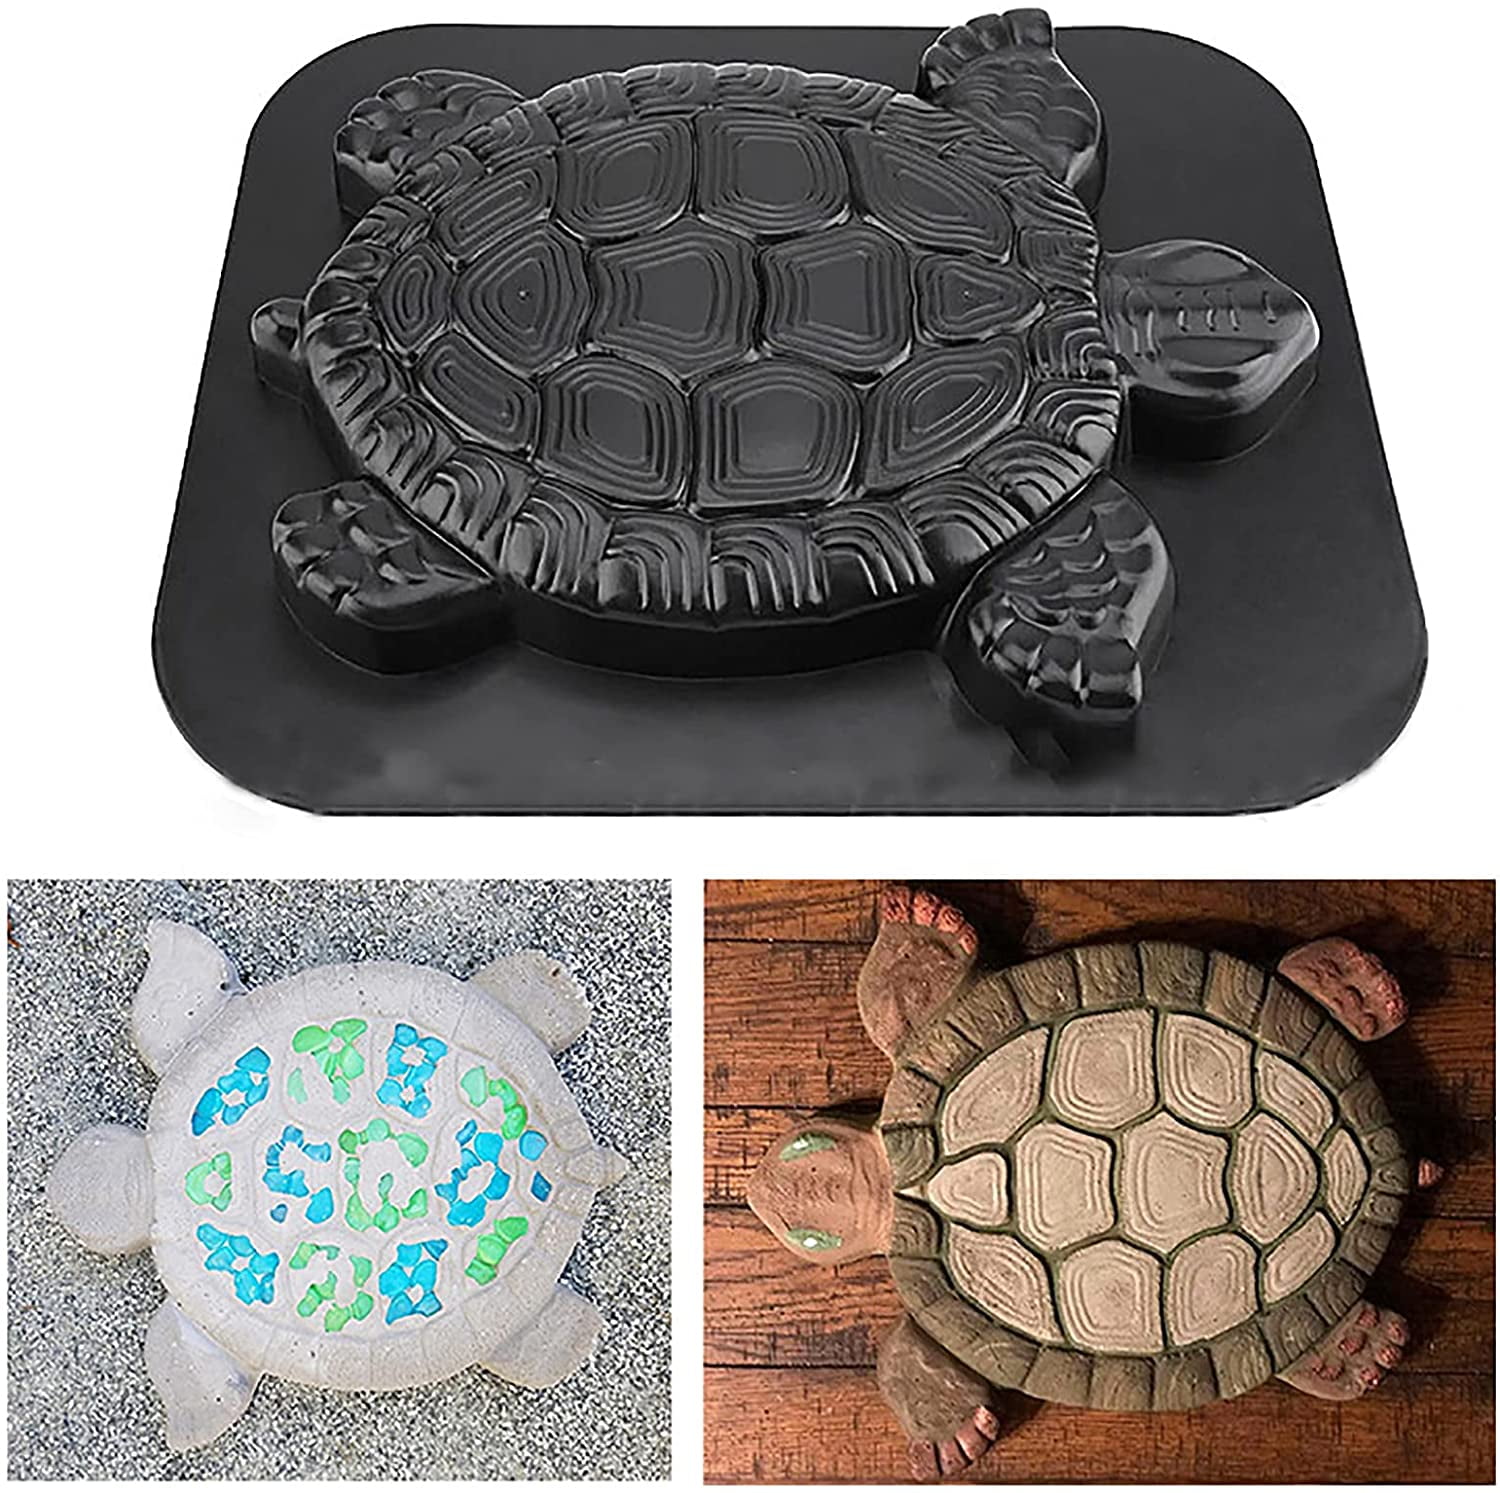 Turtle Paving Stepping Stone Mold Concrete Cement Tortoise Mould for Garden Path